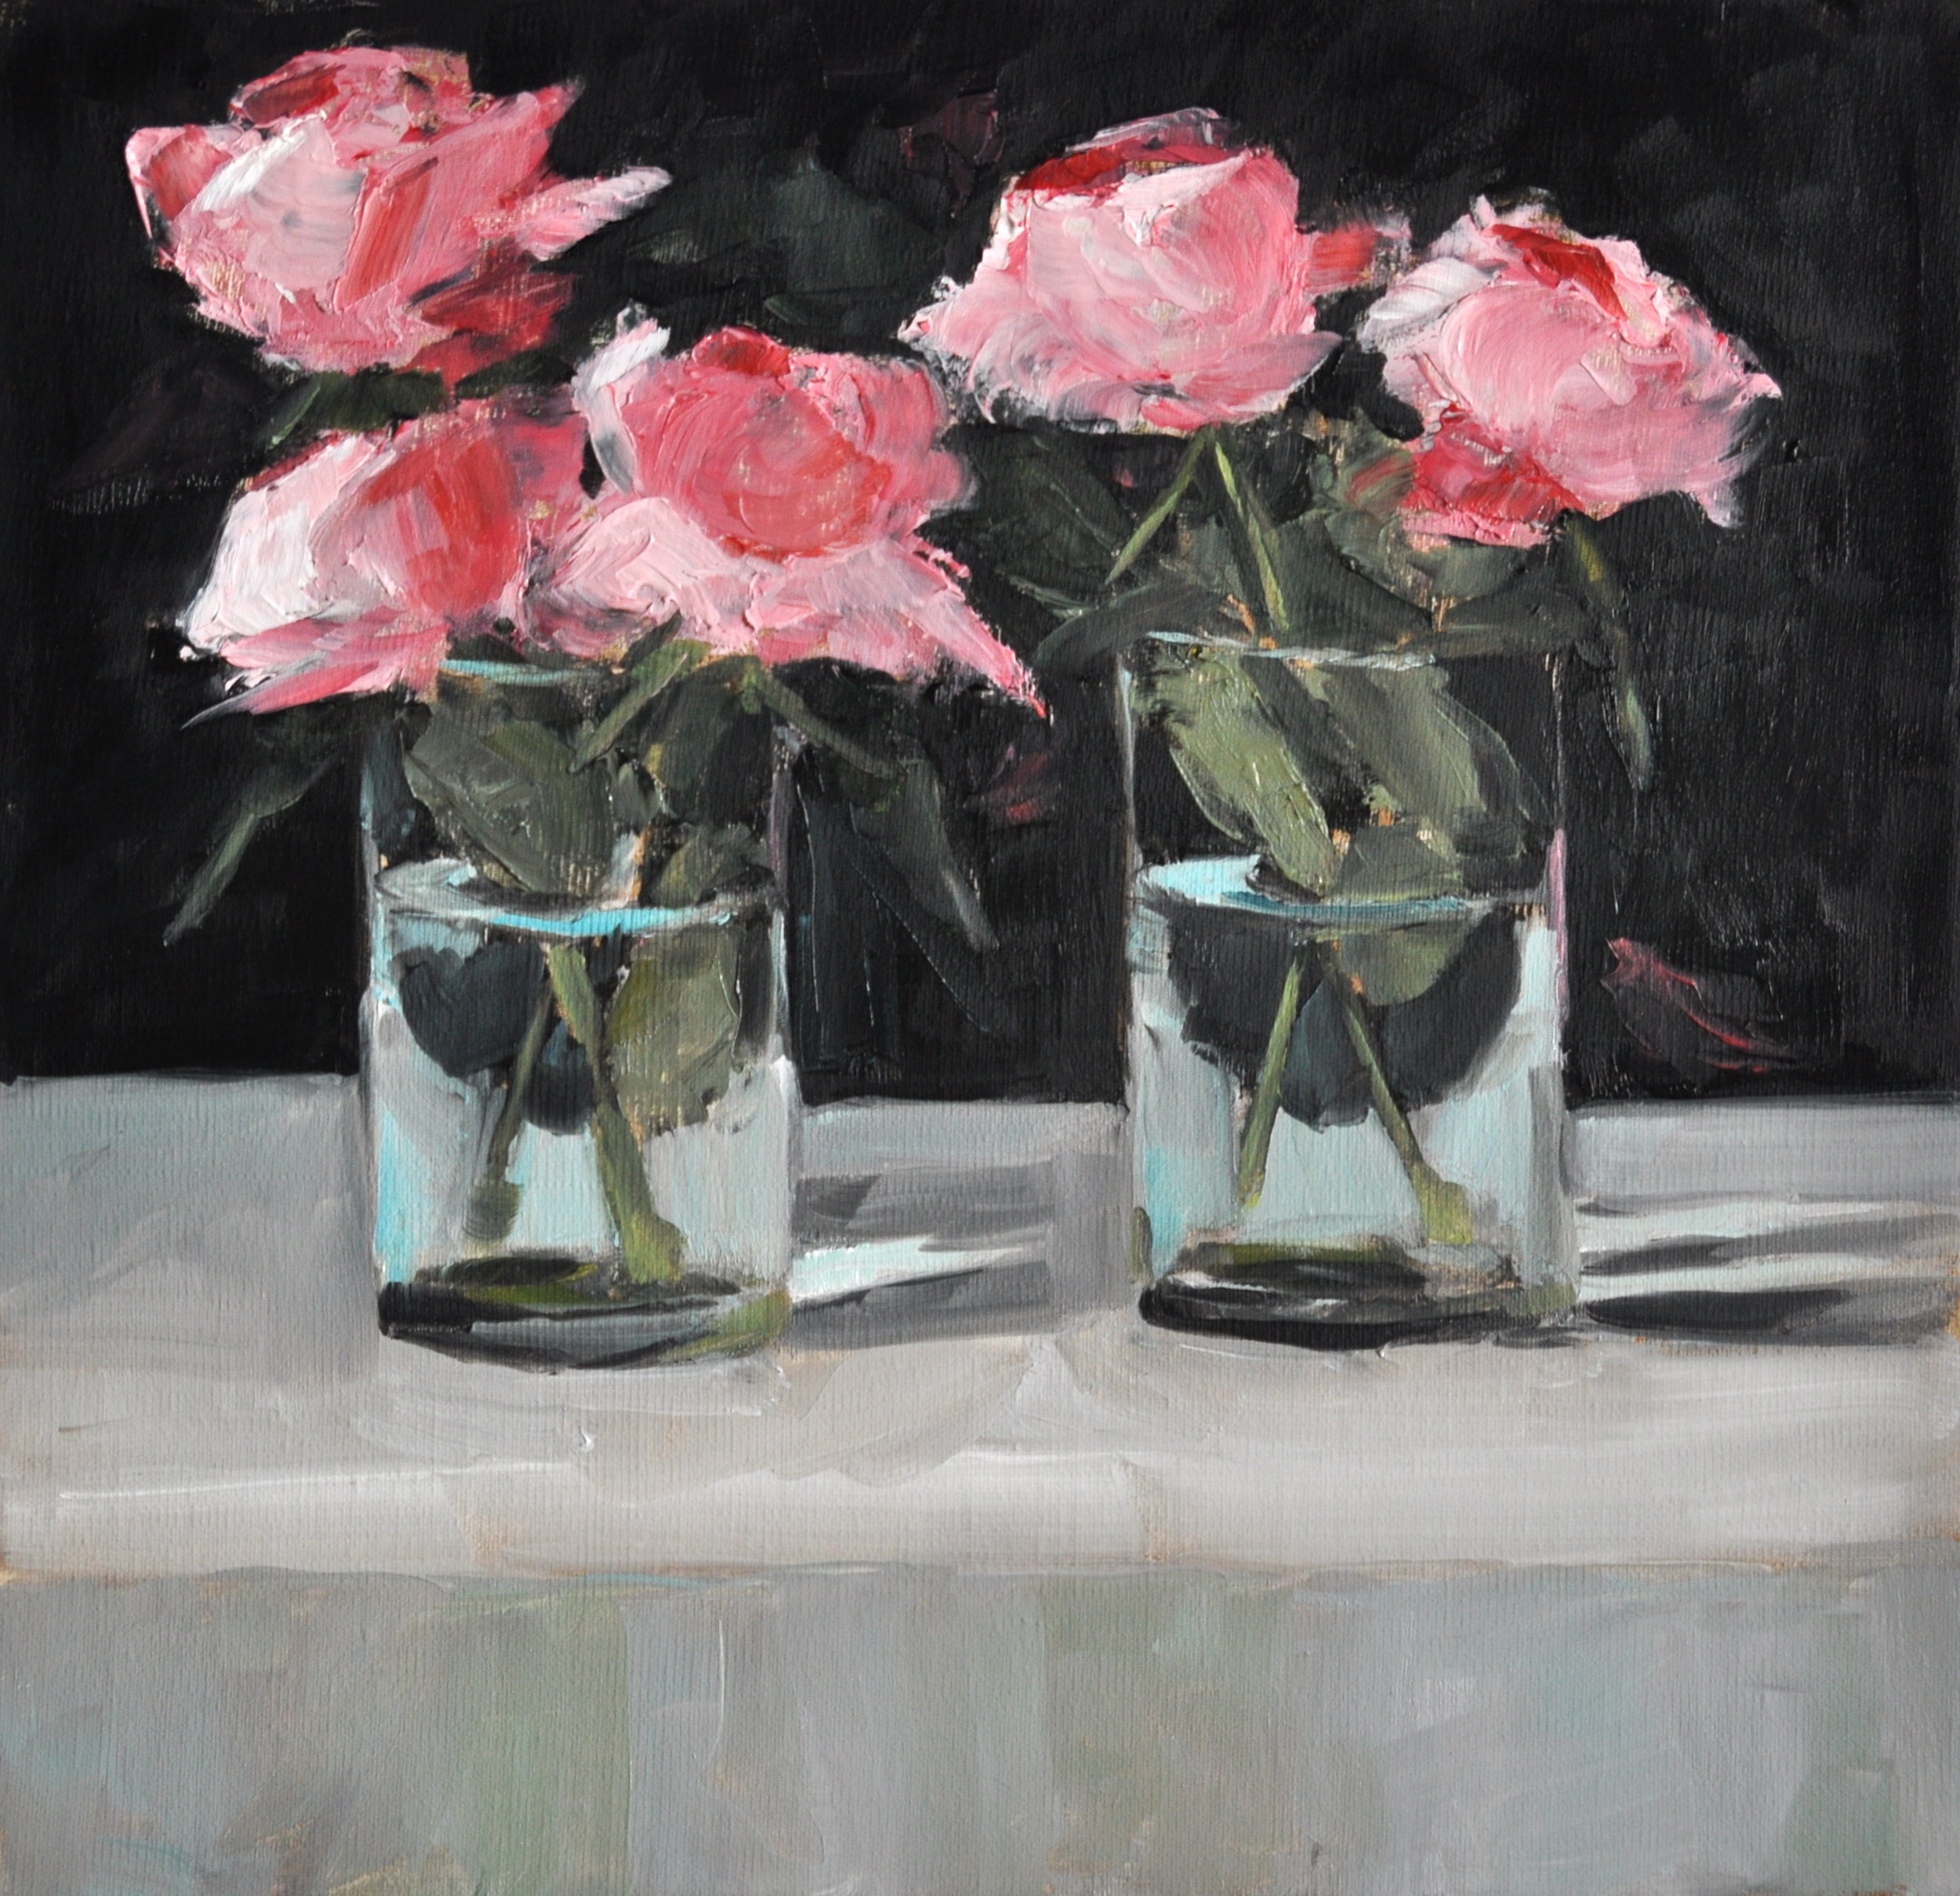 Five Pinks, Oil on Linen, 12 x 12, private collection